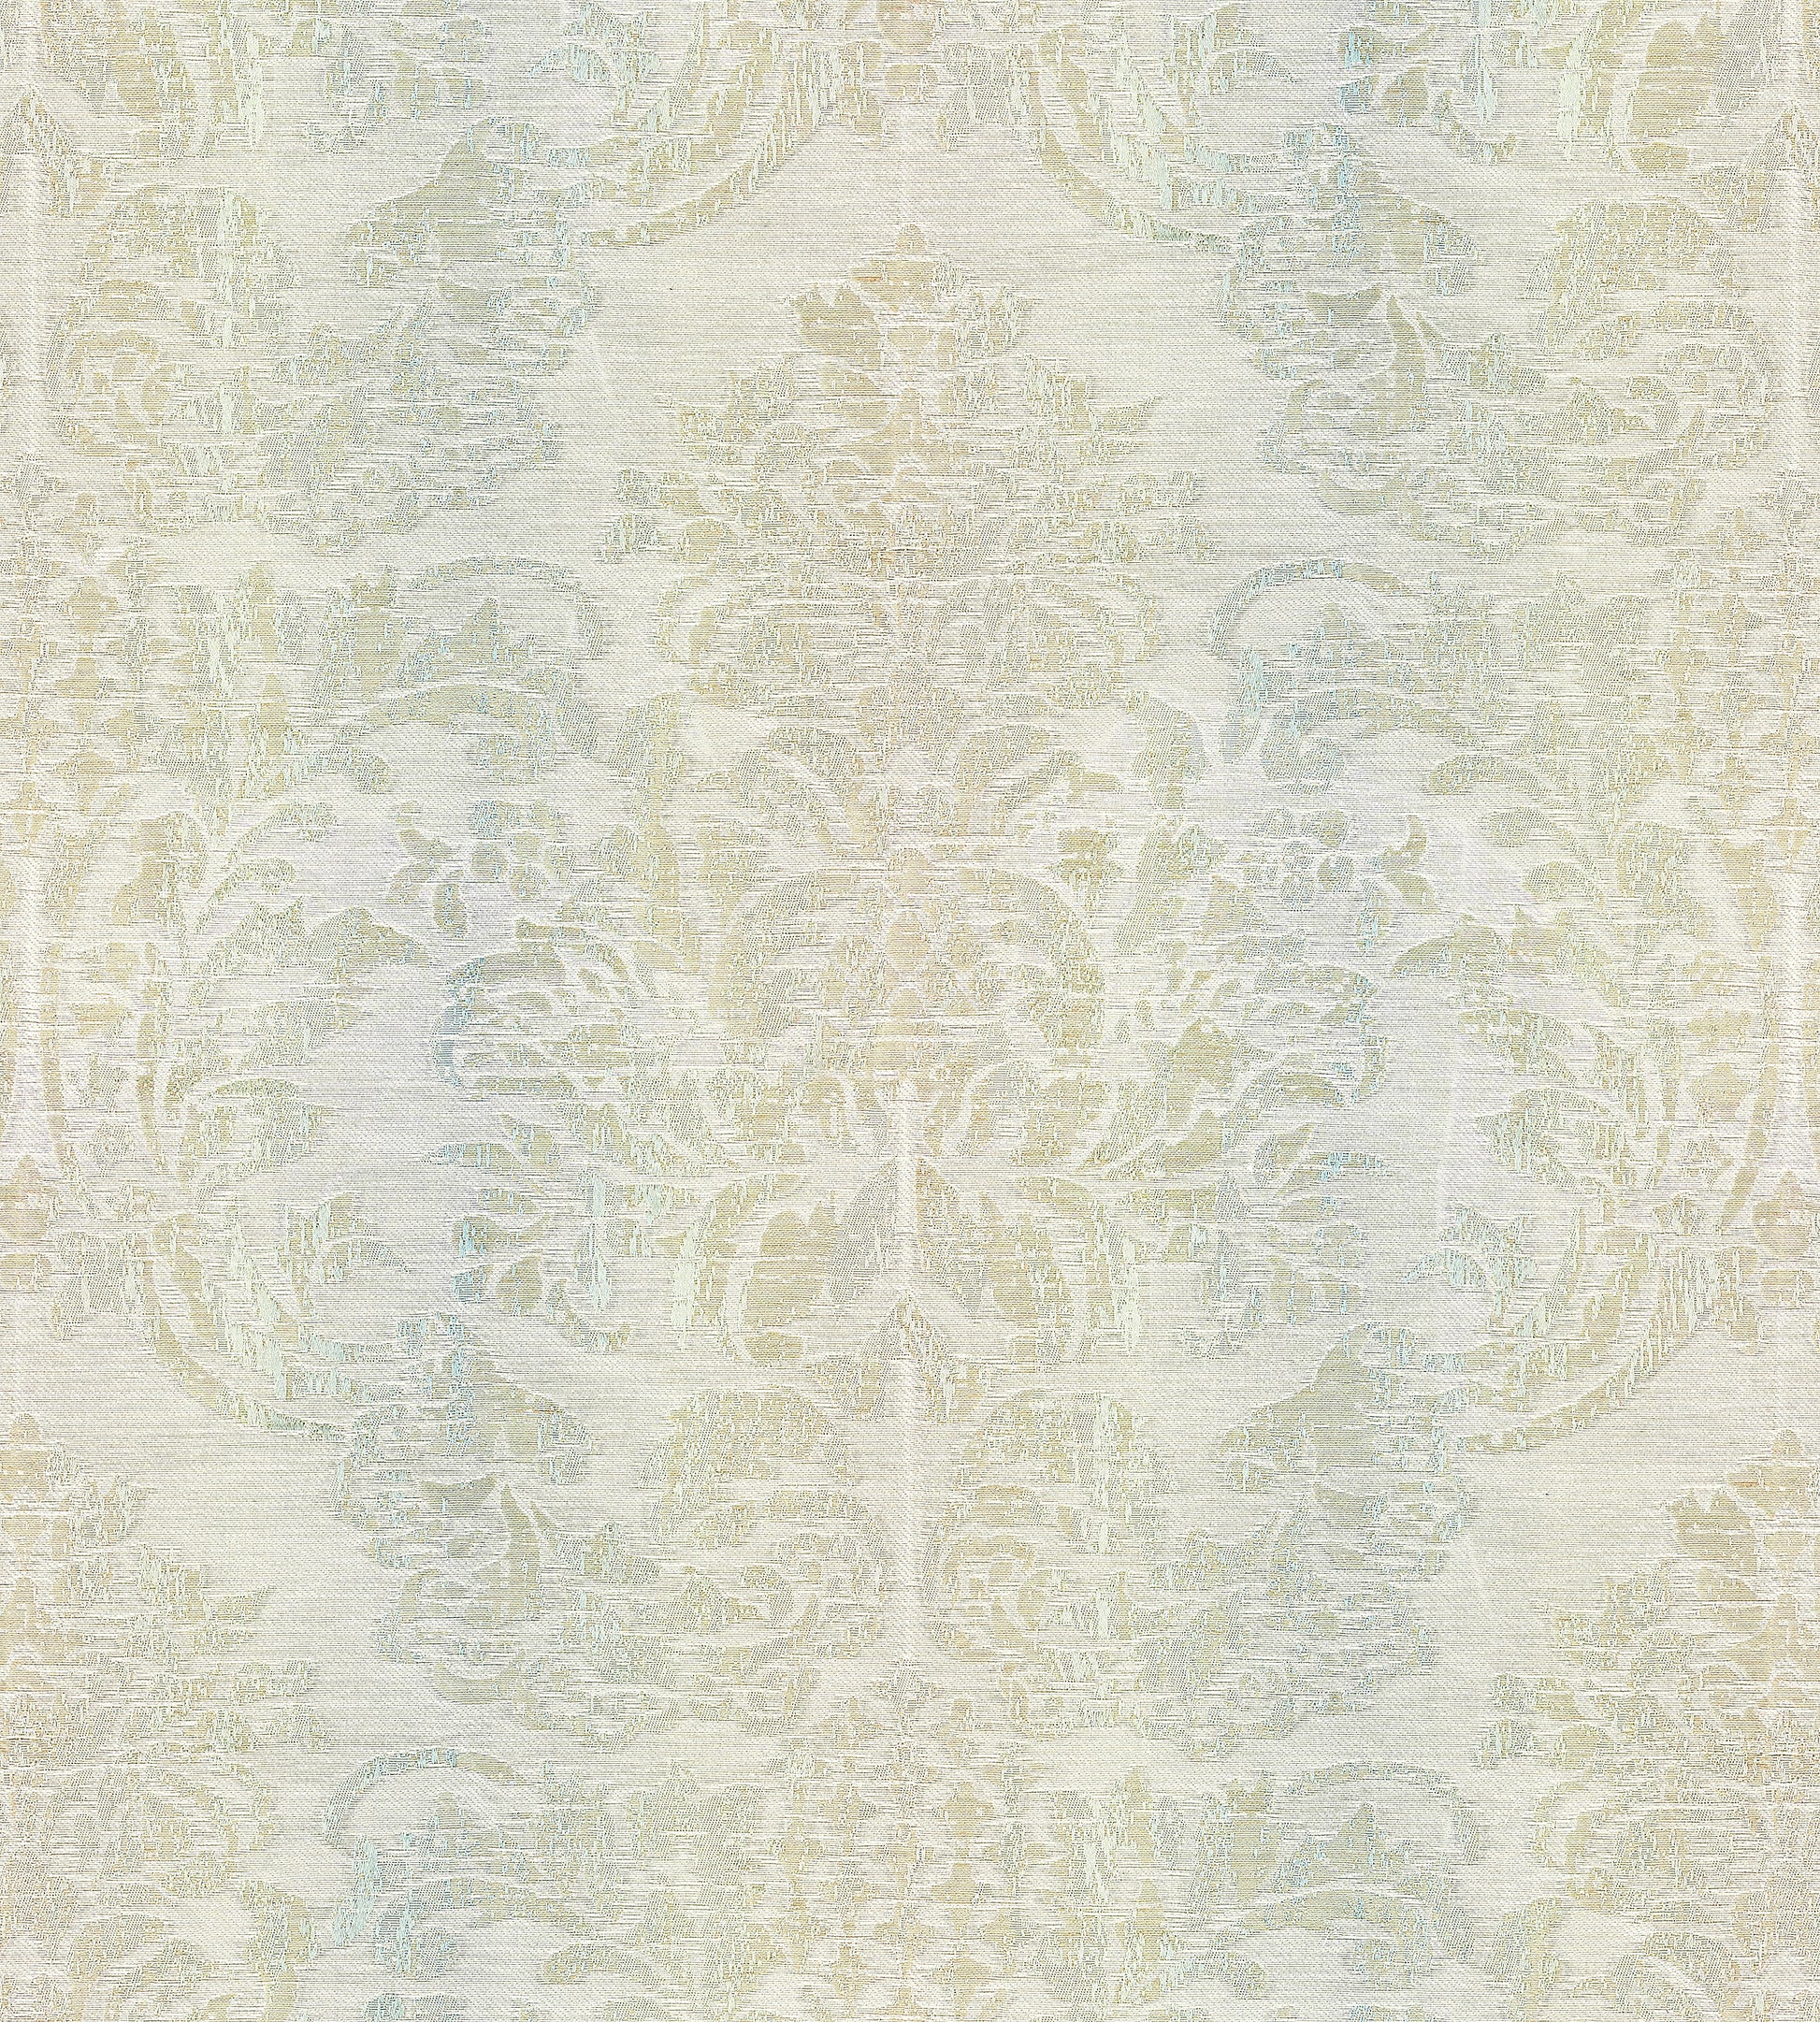 Purchase Scalamandre Fabric Pattern number SC 000227093, Sorrento Linen Damask Mineral 1